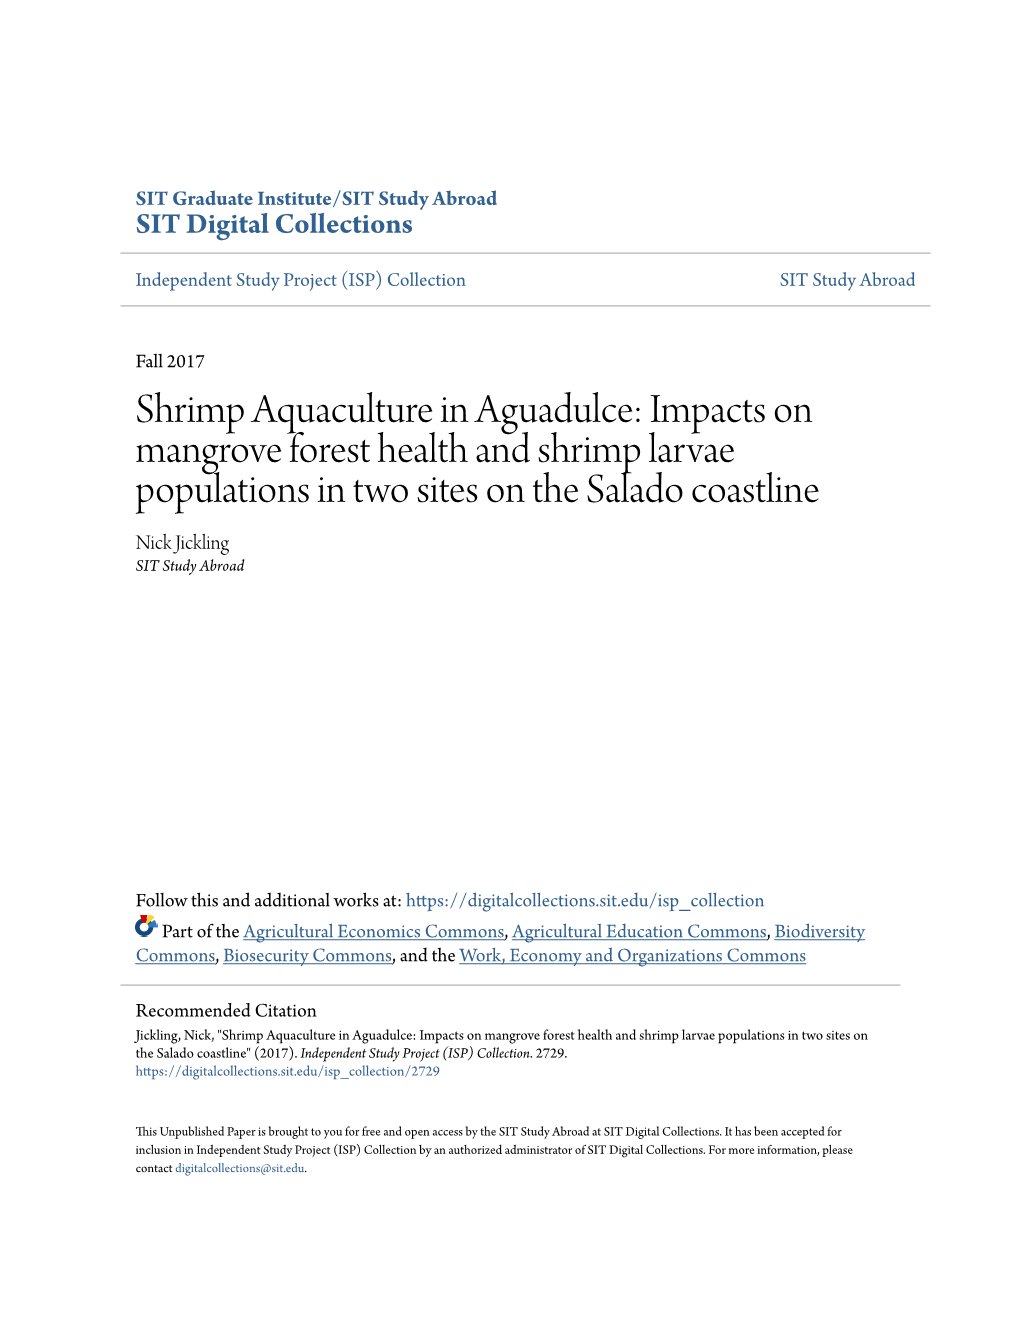 Shrimp Aquaculture in Aguadulce: Impacts on Mangrove Forest Health and Shrimp Larvae Populations in Two Sites on the Salado Coastline Nick Jickling SIT Study Abroad